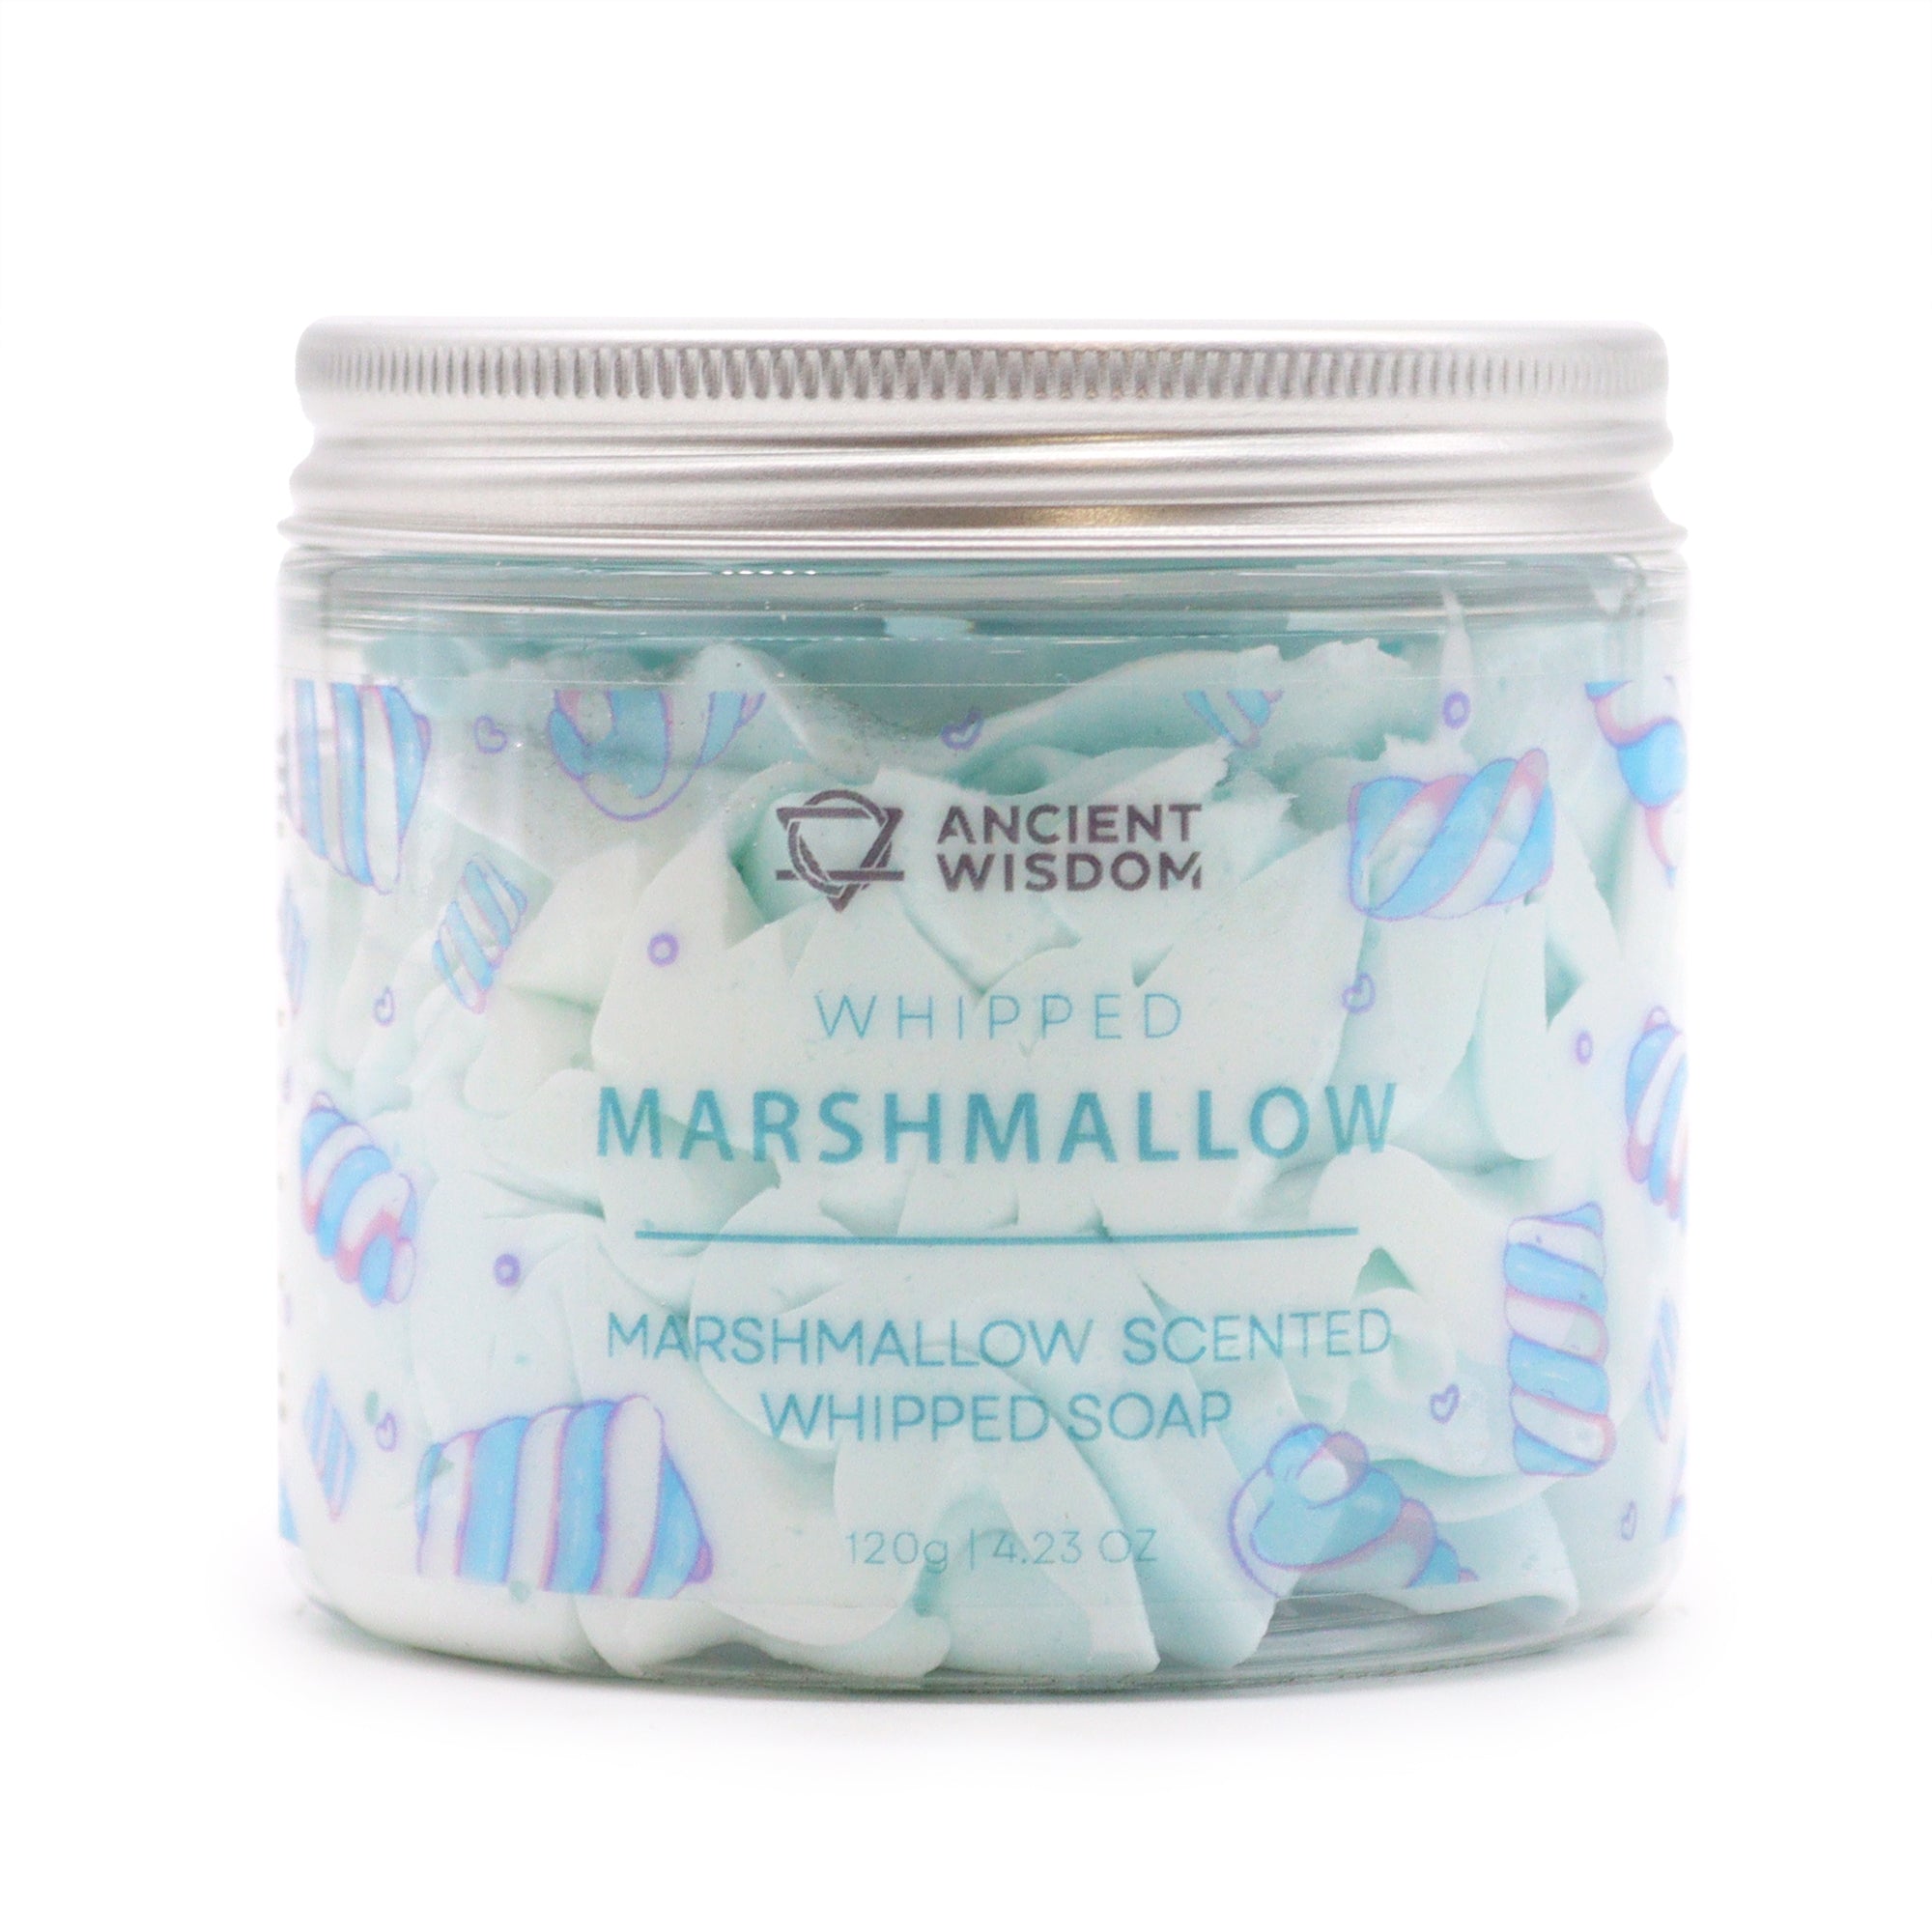 View Marshmallow Whipped Cream Soap 120g information